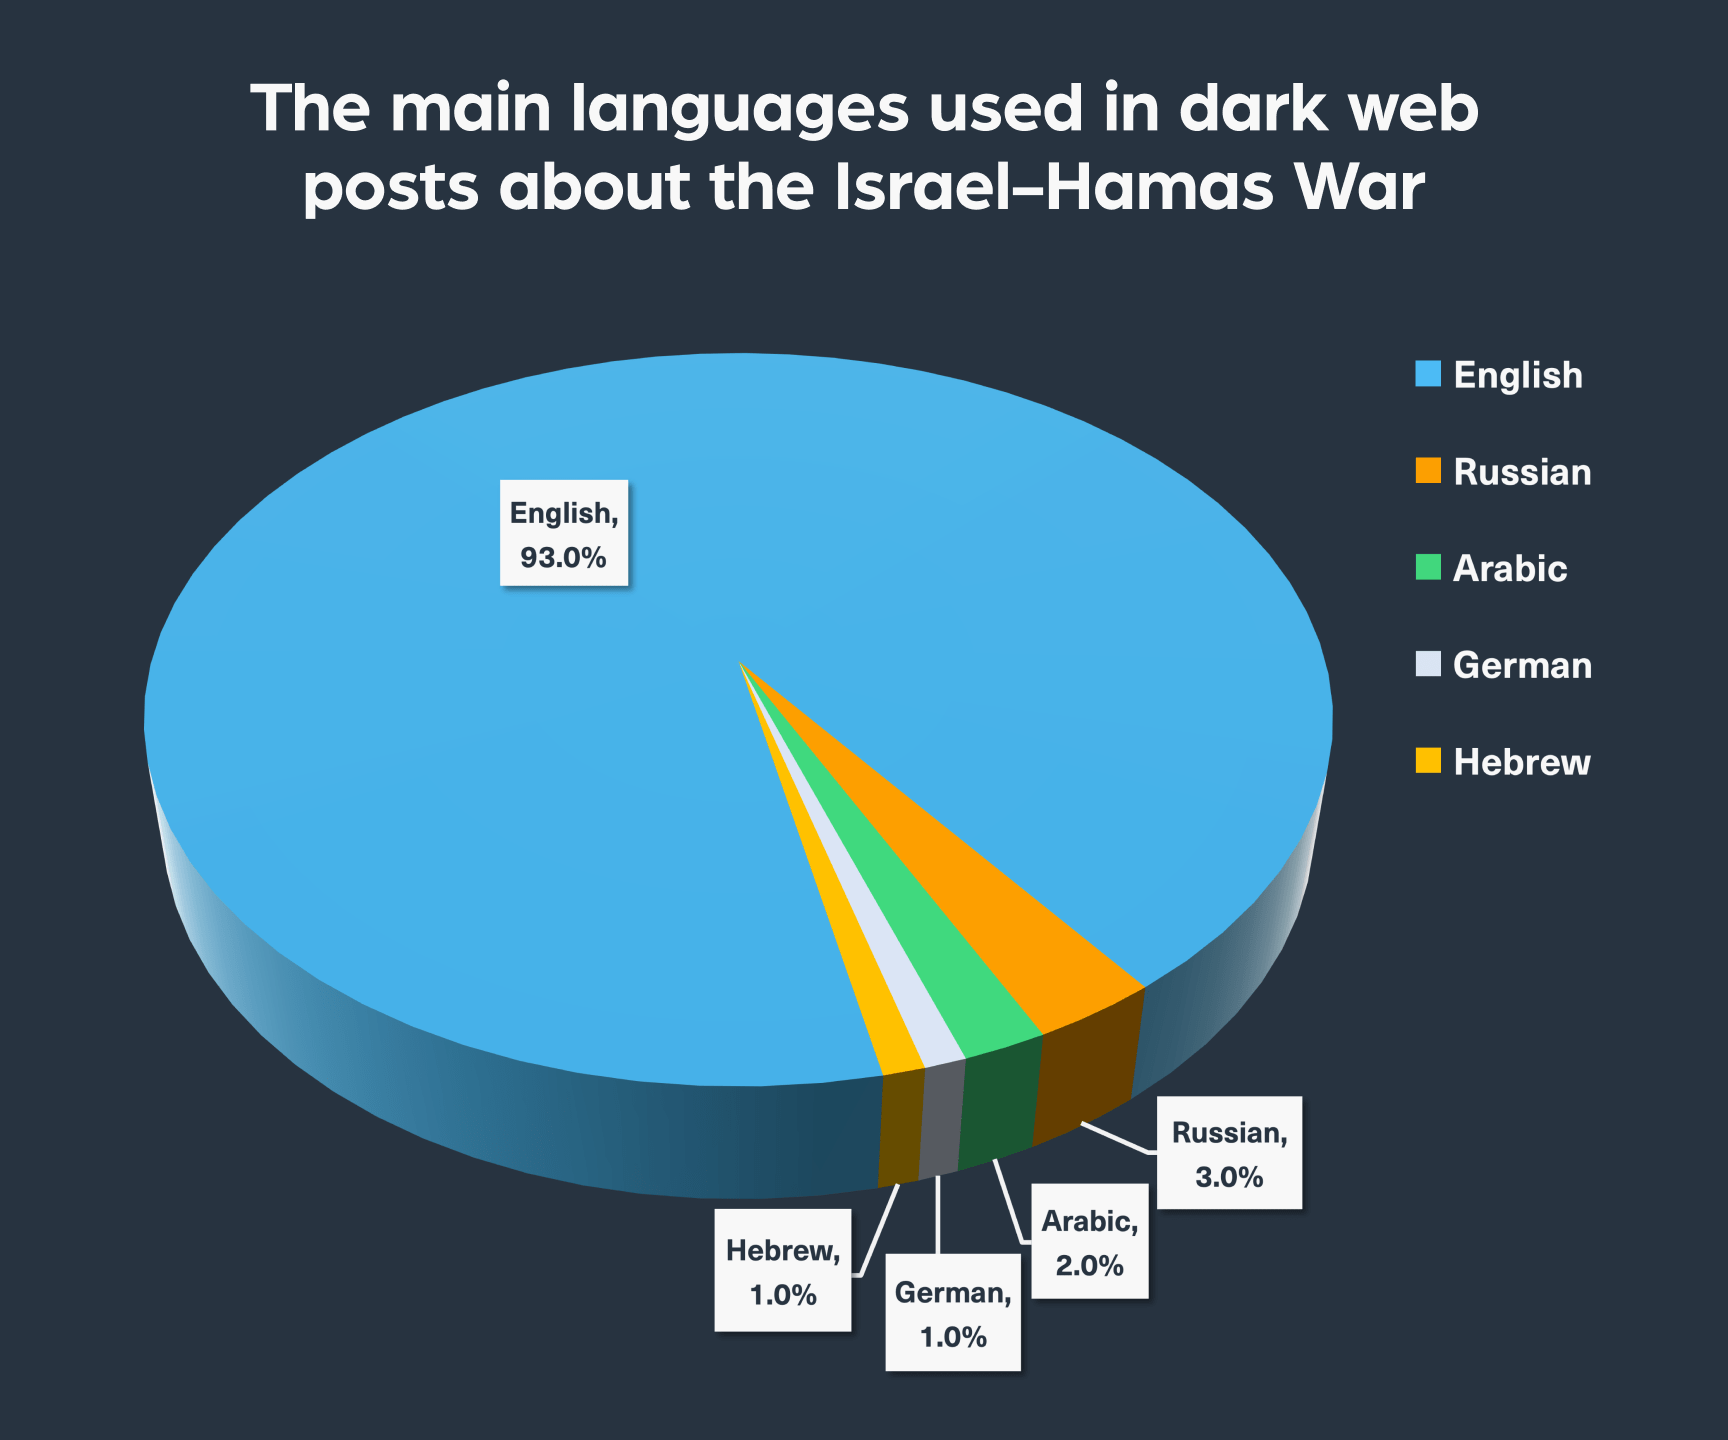 The main languages used in dark web posts about the Israel-Hamas War